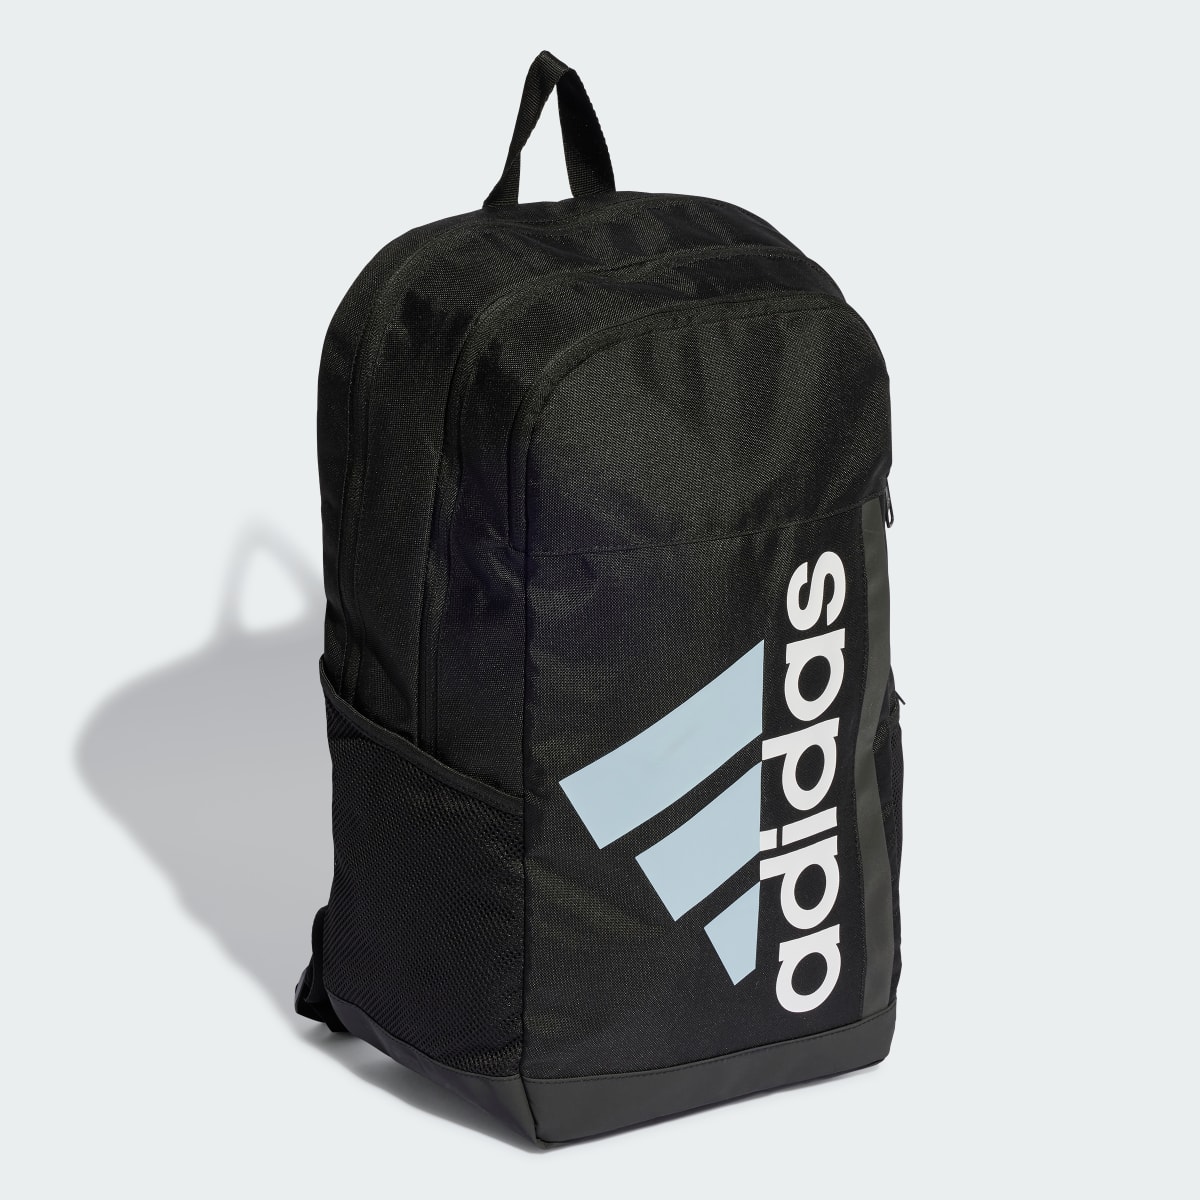 Adidas Motion SPW Graphic Backpack. 4